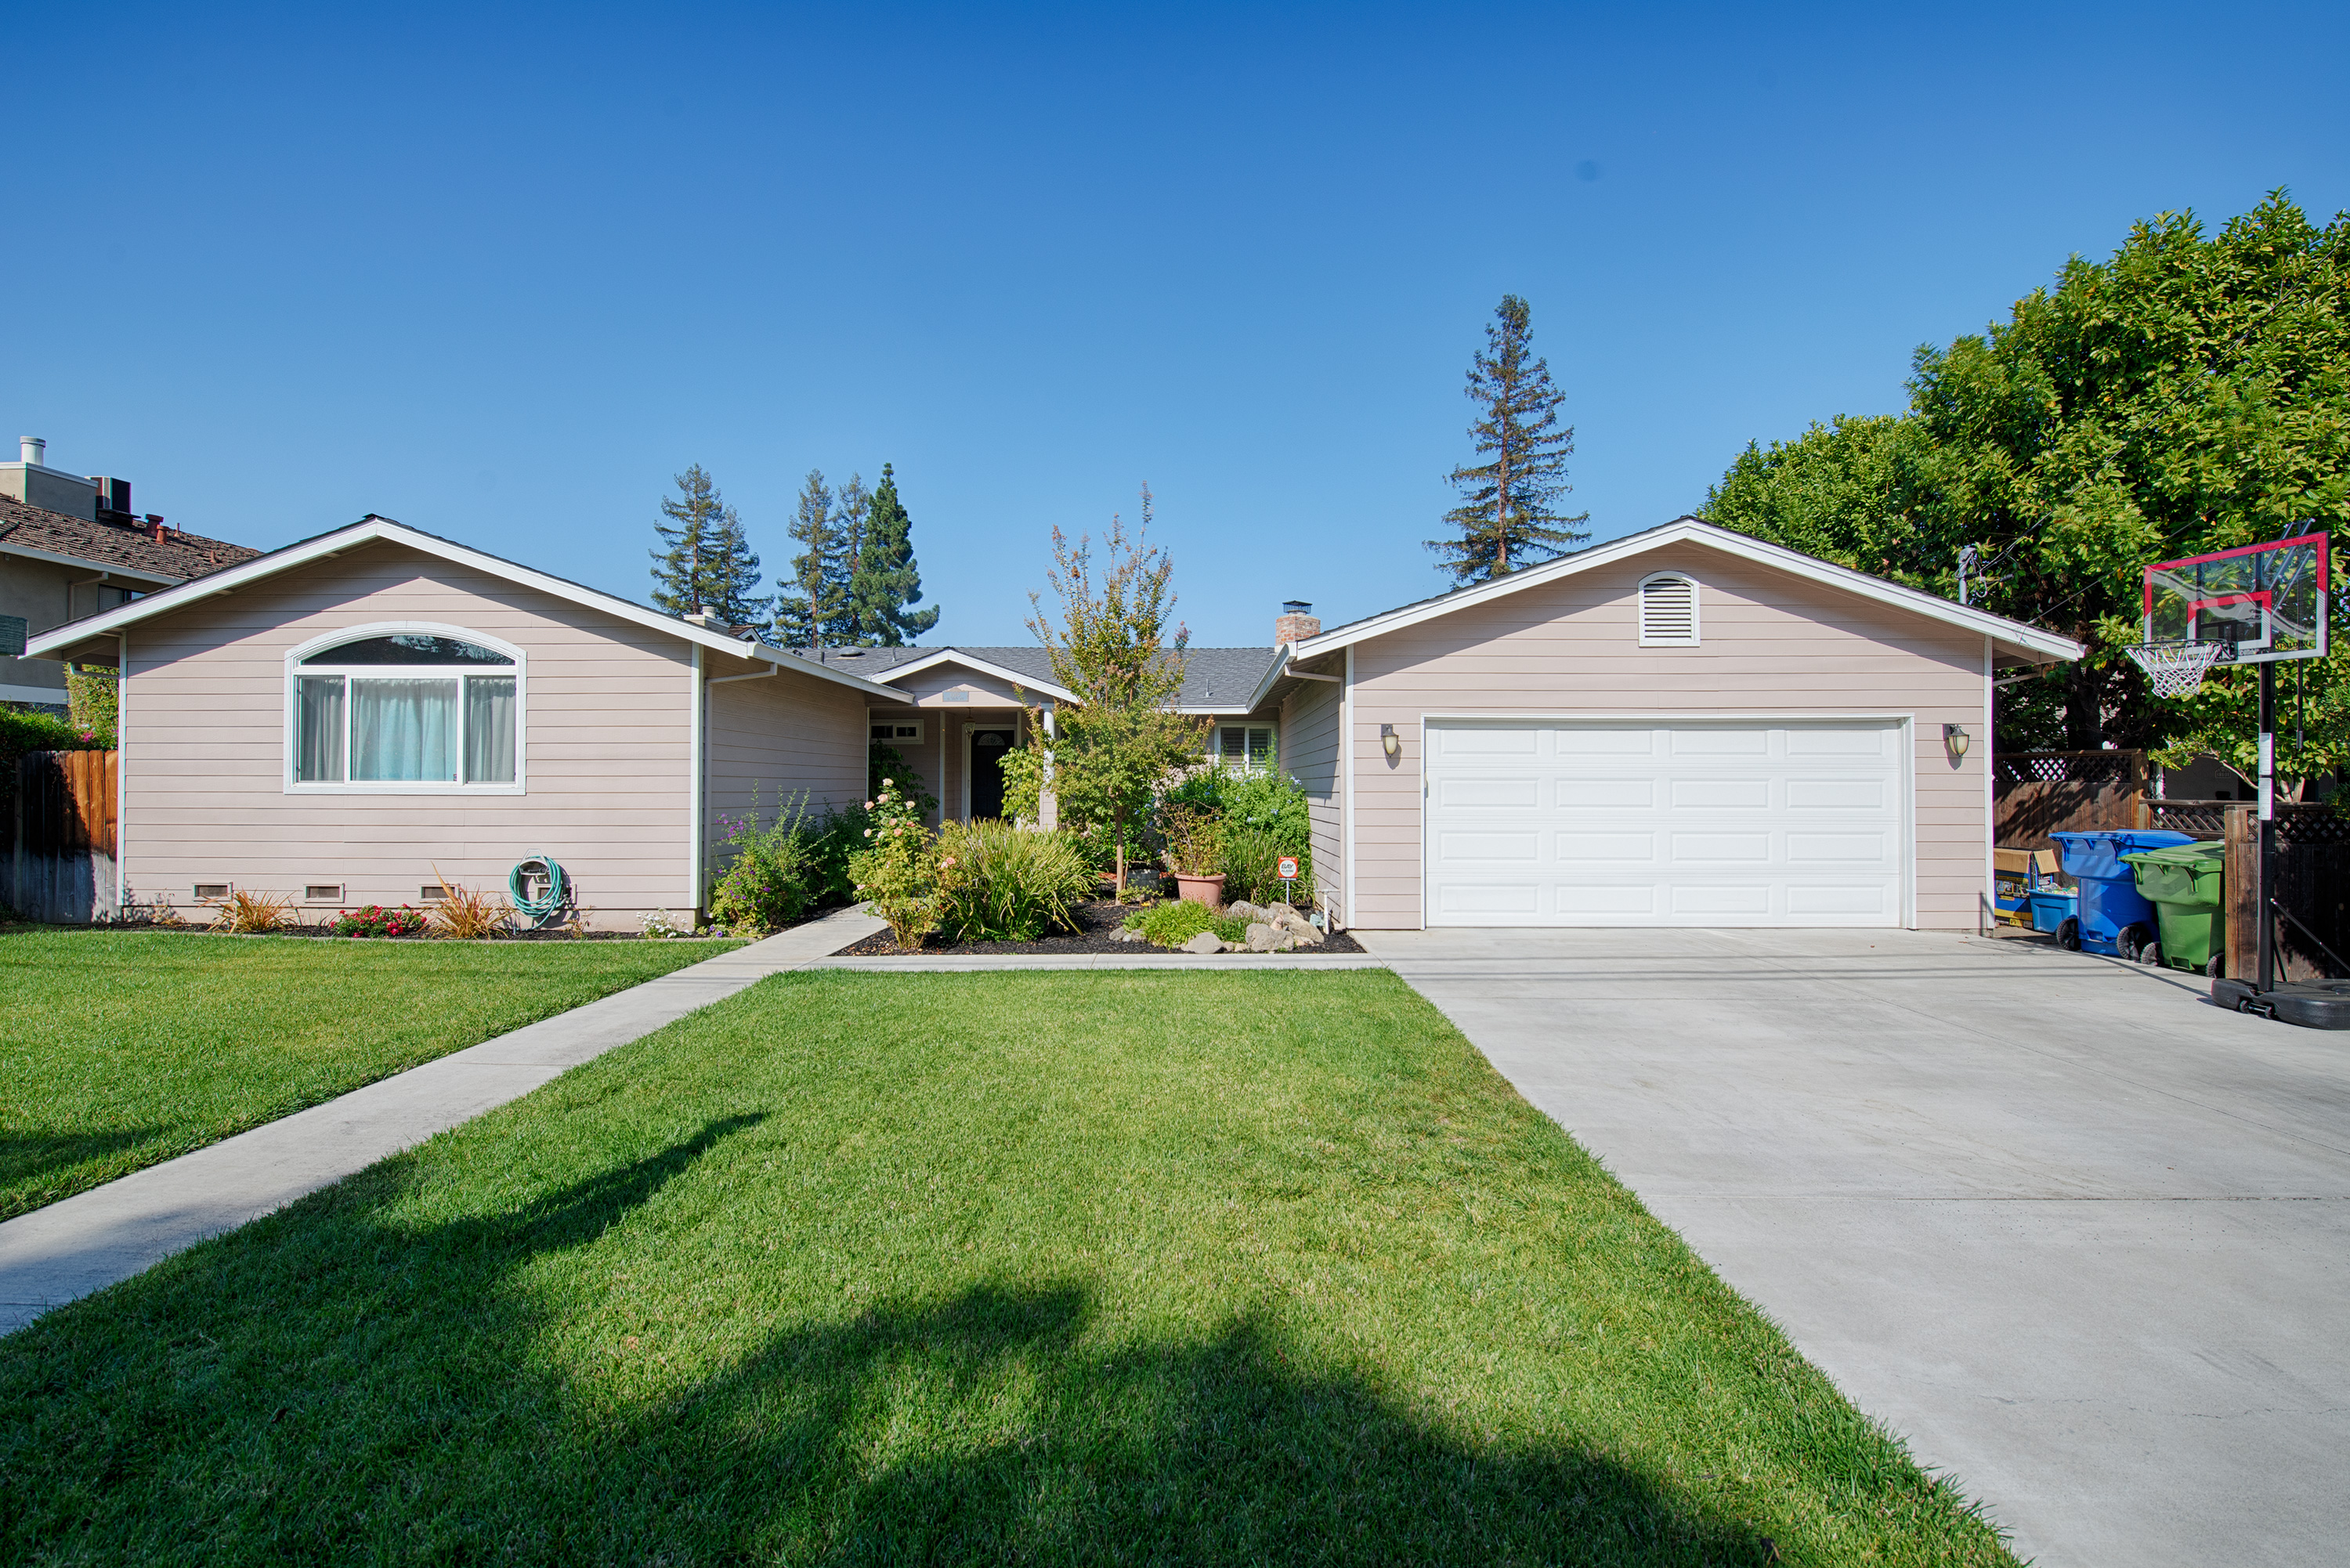 Front View - 1085 El Solyo Ave, Campbell 95008